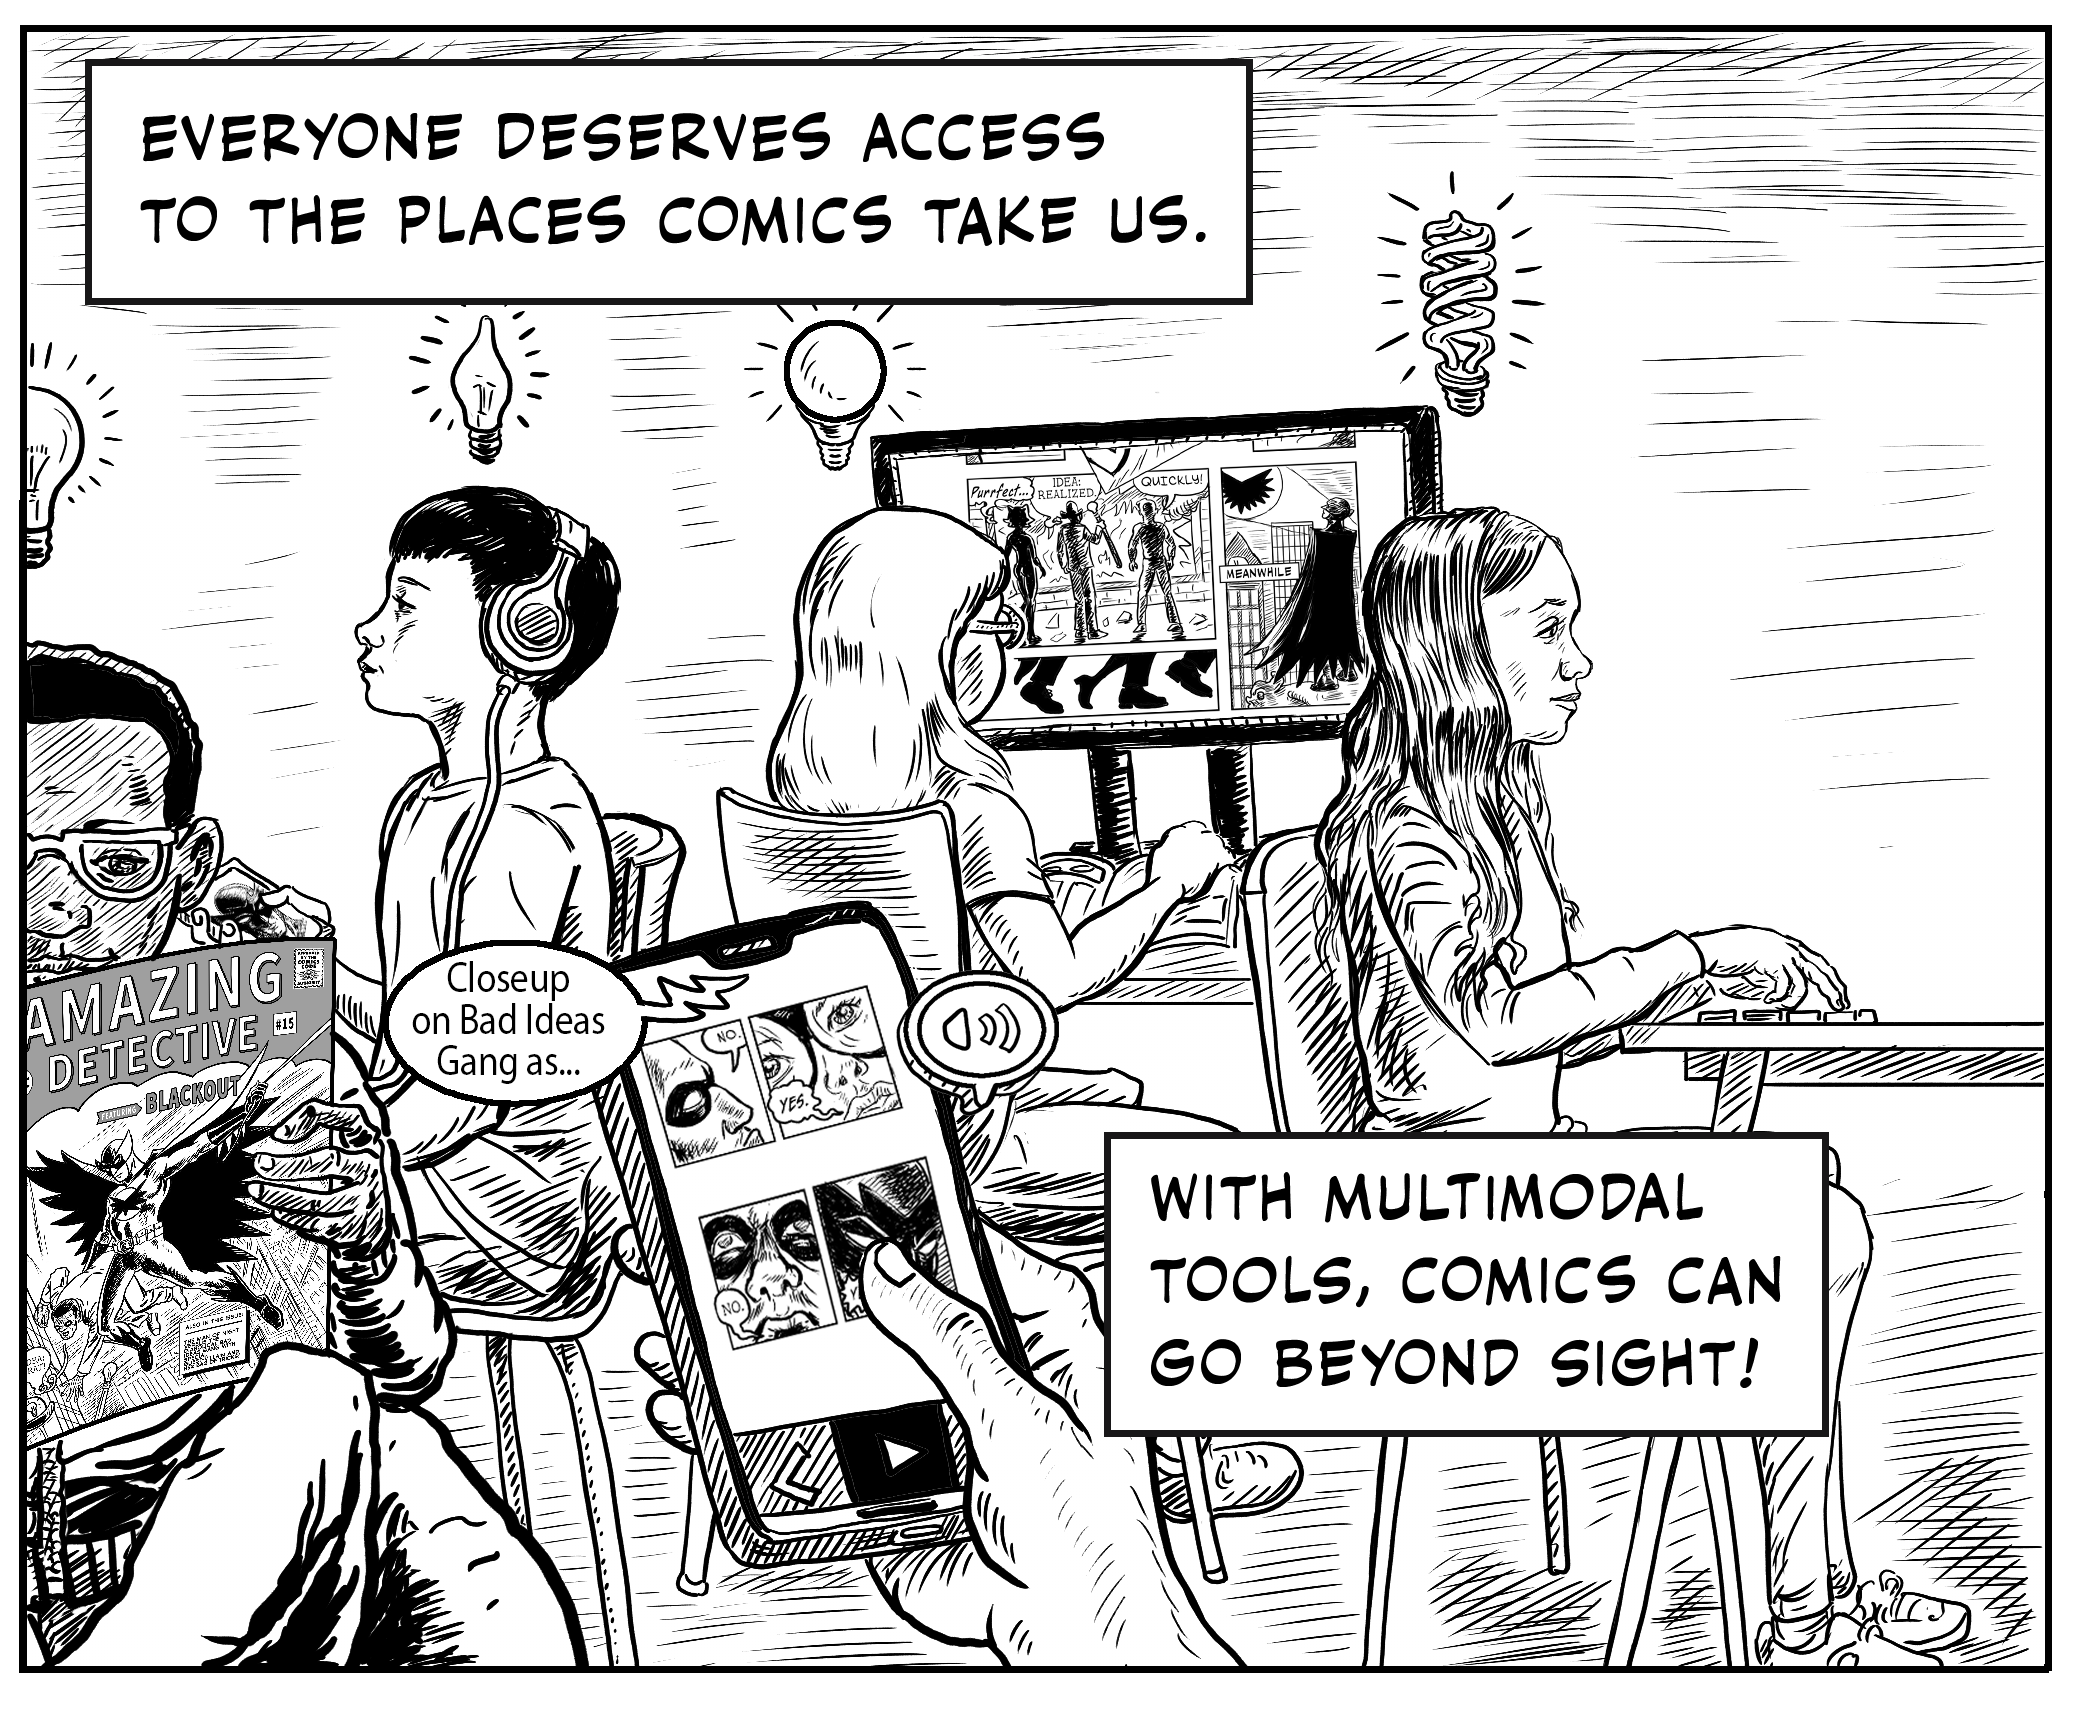 The final panel, text on top “Everyone deserves access to the places comics take us.” Four children in a shared space all are experiencing comics, each with a different type of lightbulb overhead, glowing and activated from their own comic modality. A black boy with glasses sits with legs crisscrossed and reads the print copy of Blackout. Behind him, an Asian American boy wears headphones and holds a device that shows a still of Blackout. The side and back of a third child with long hair and thick eyeglass frames using a digital magnifier to view a zoomed in page of Blackout. The fourth, a white girl at a desk, looks straight ahead as her hands explore a tactile comic in front of her. In the center of the picture, a hand holds a phone using an app to access the Blackout comic, sound escaping from it voices, “Closeup on Bad Ideas Gang as…” Taken as a whole, a room of active comics experiences for all. Final caption reads, “With multimodal tools, comics can go beyond sight!” 